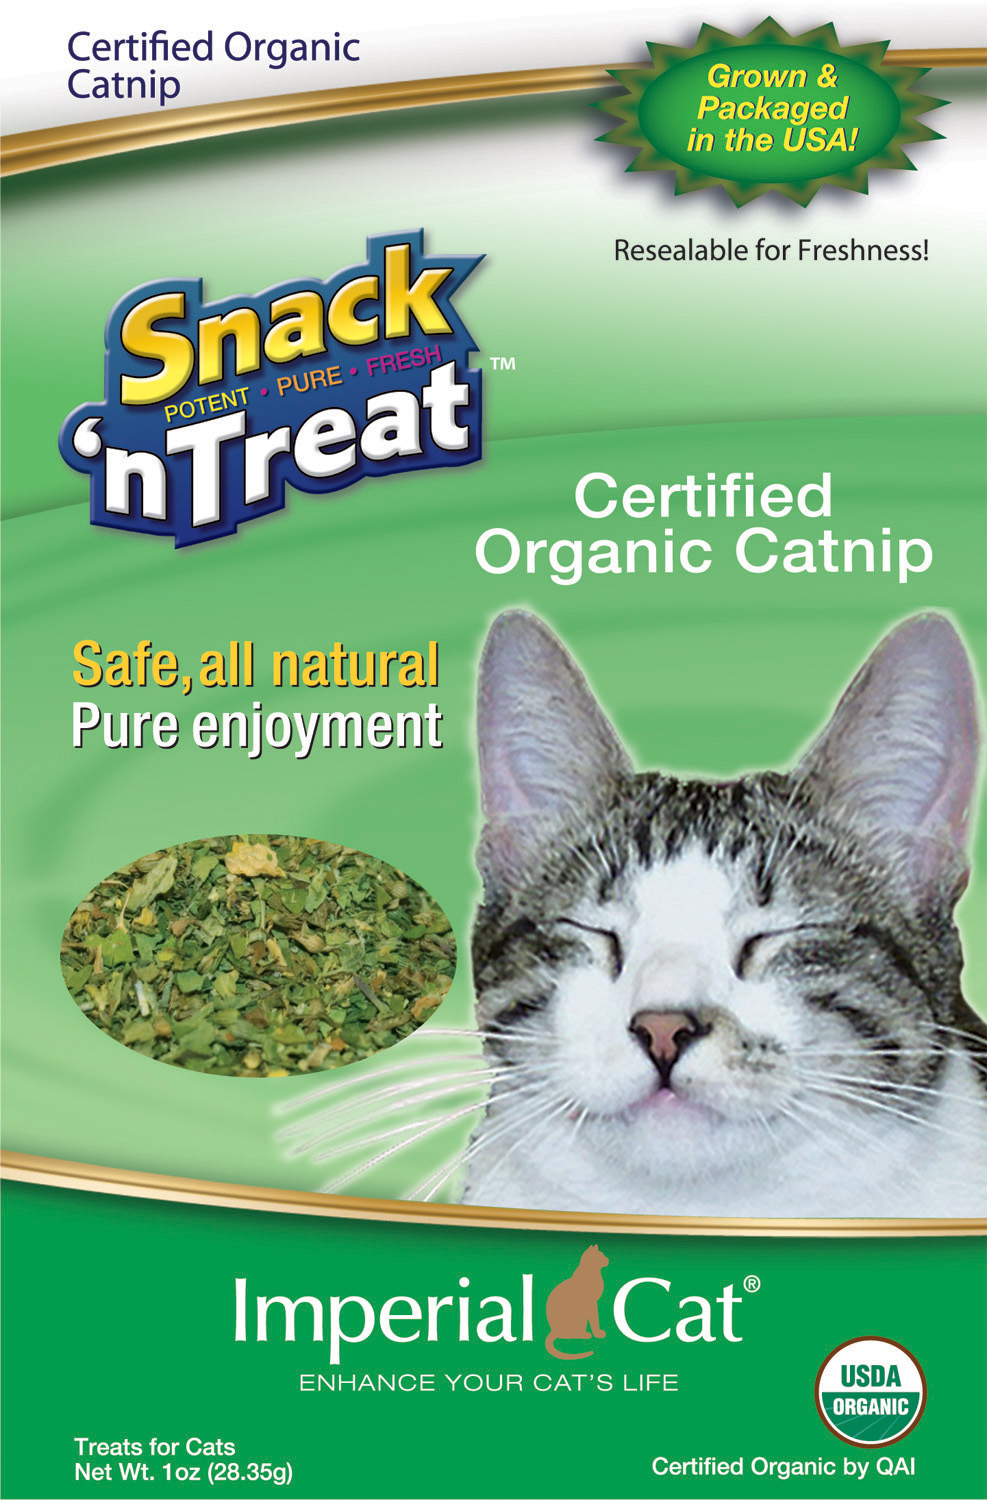 catnip products for cats